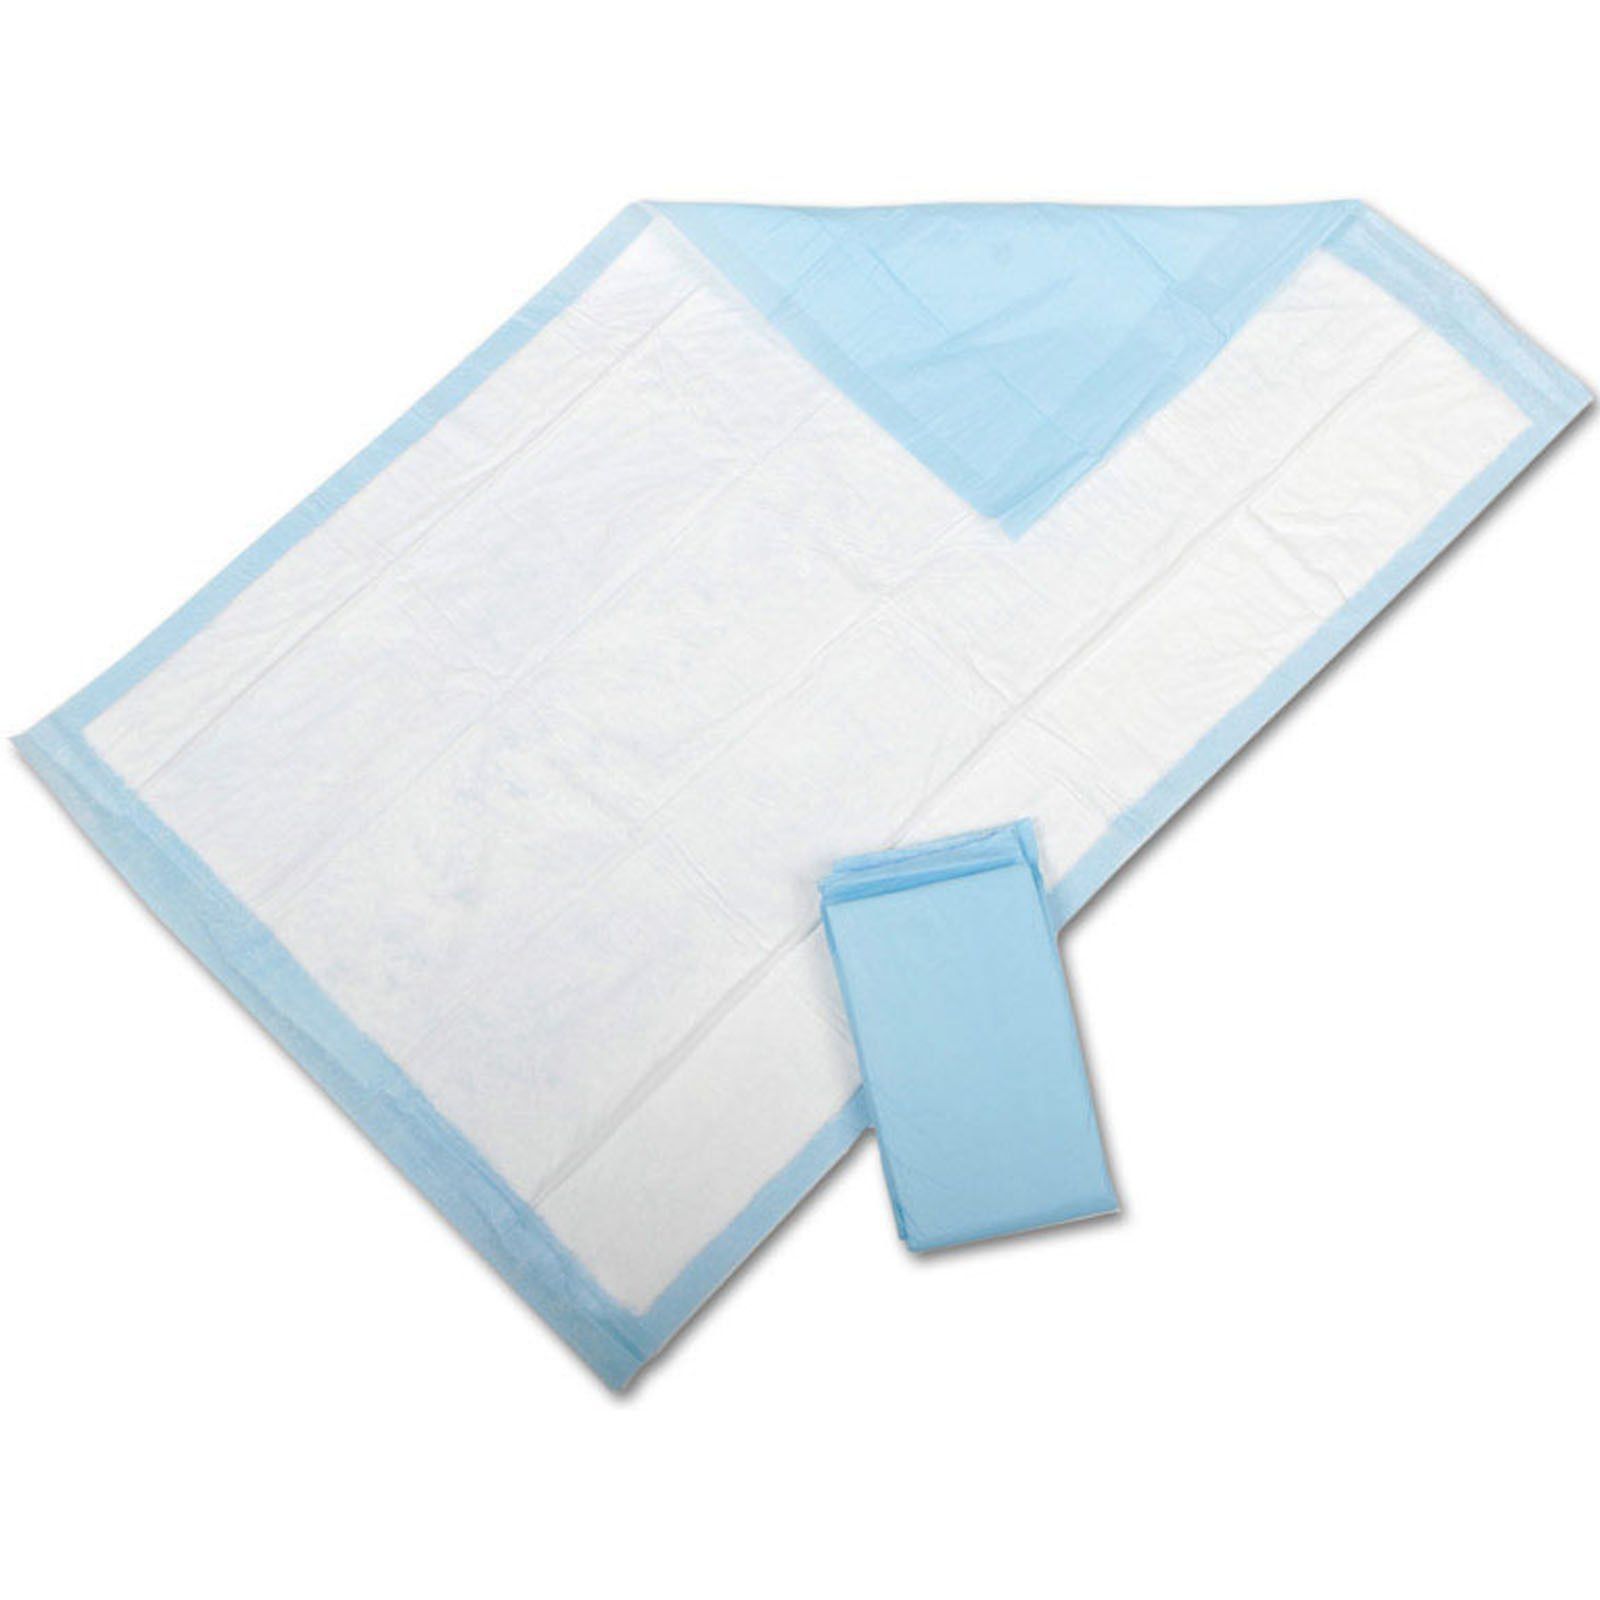 Disposable Bed Pads 2